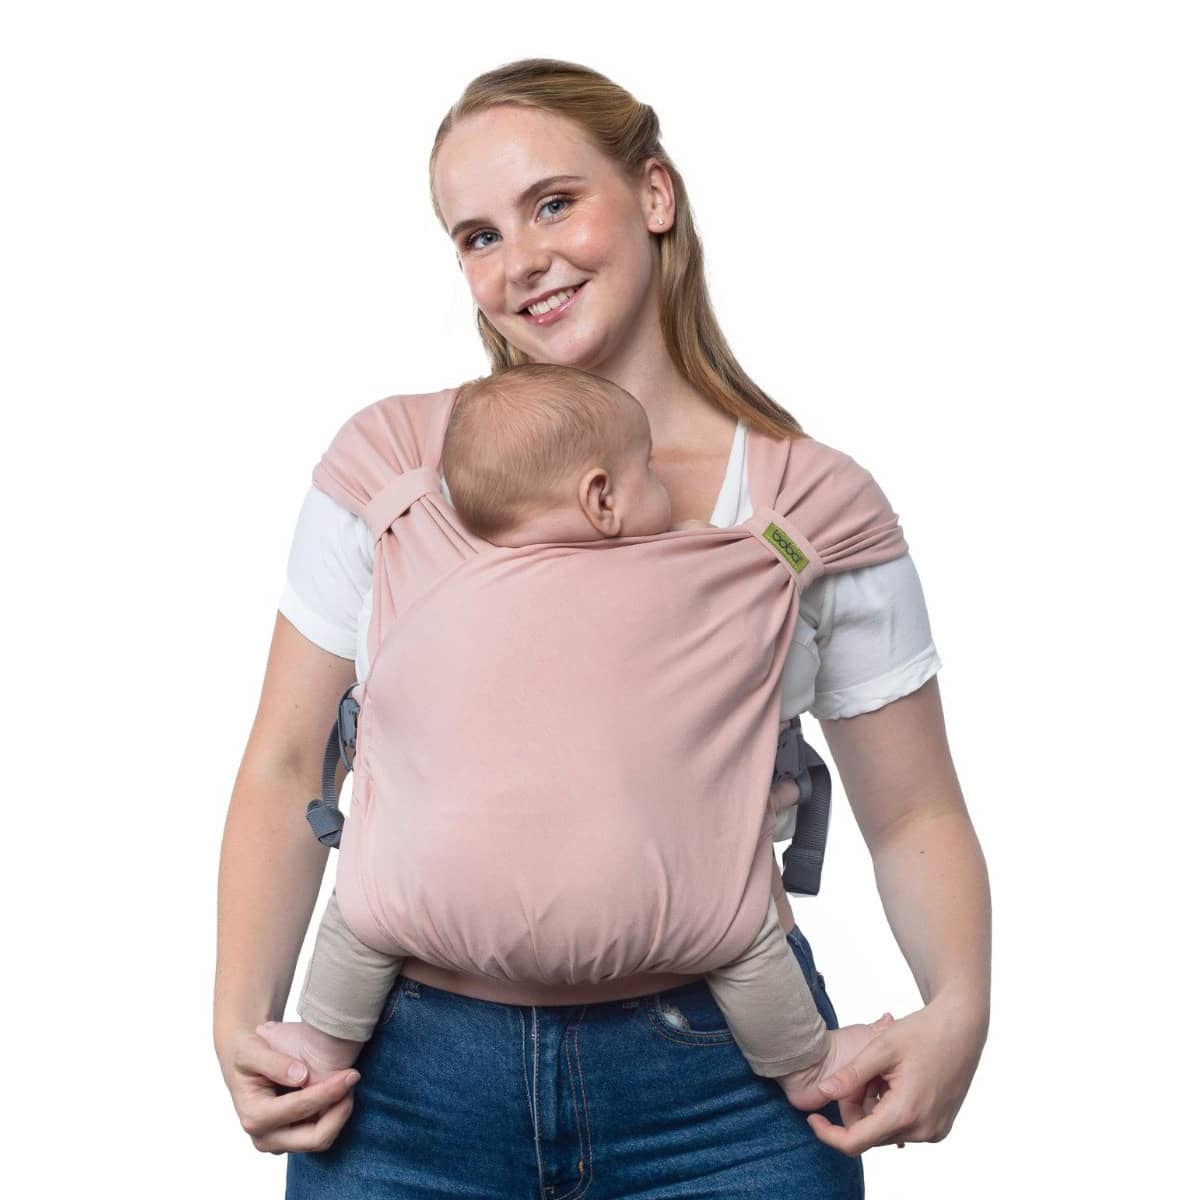 Boba Bliss Buckled Wrap Carrier - Bloom